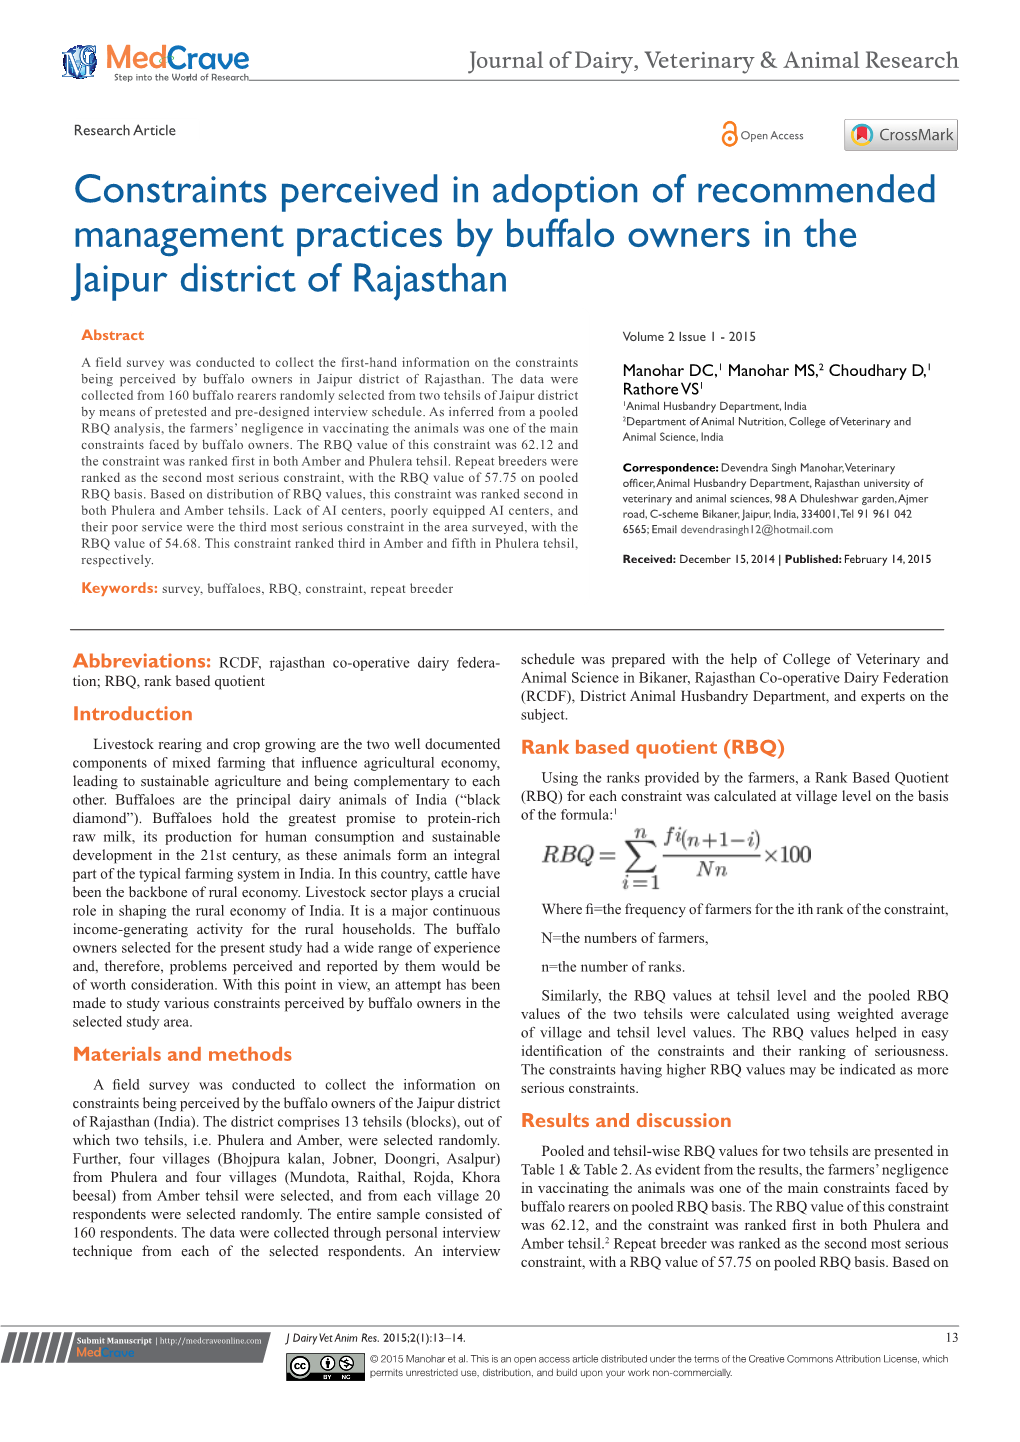 Constraints Perceived in Adoption of Recommended Management Practices by Buffalo Owners in the Jaipur District of Rajasthan